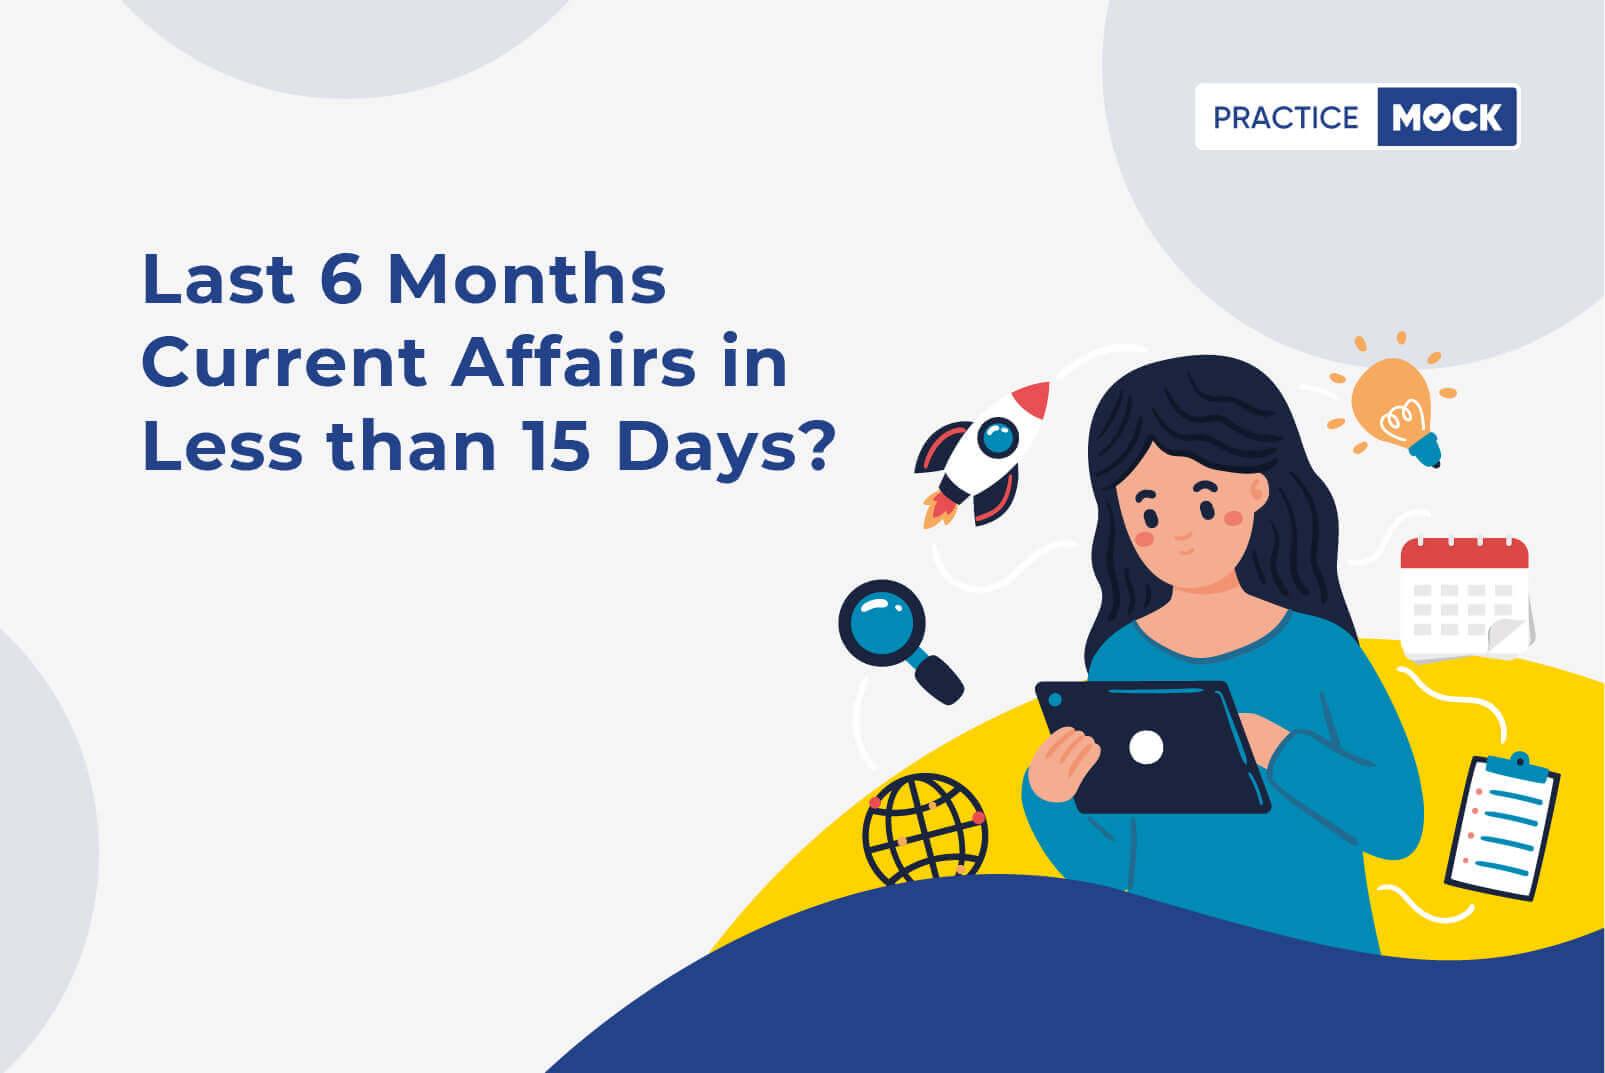 How to Cover last 6 months Current Affairs in less than 15 Days?